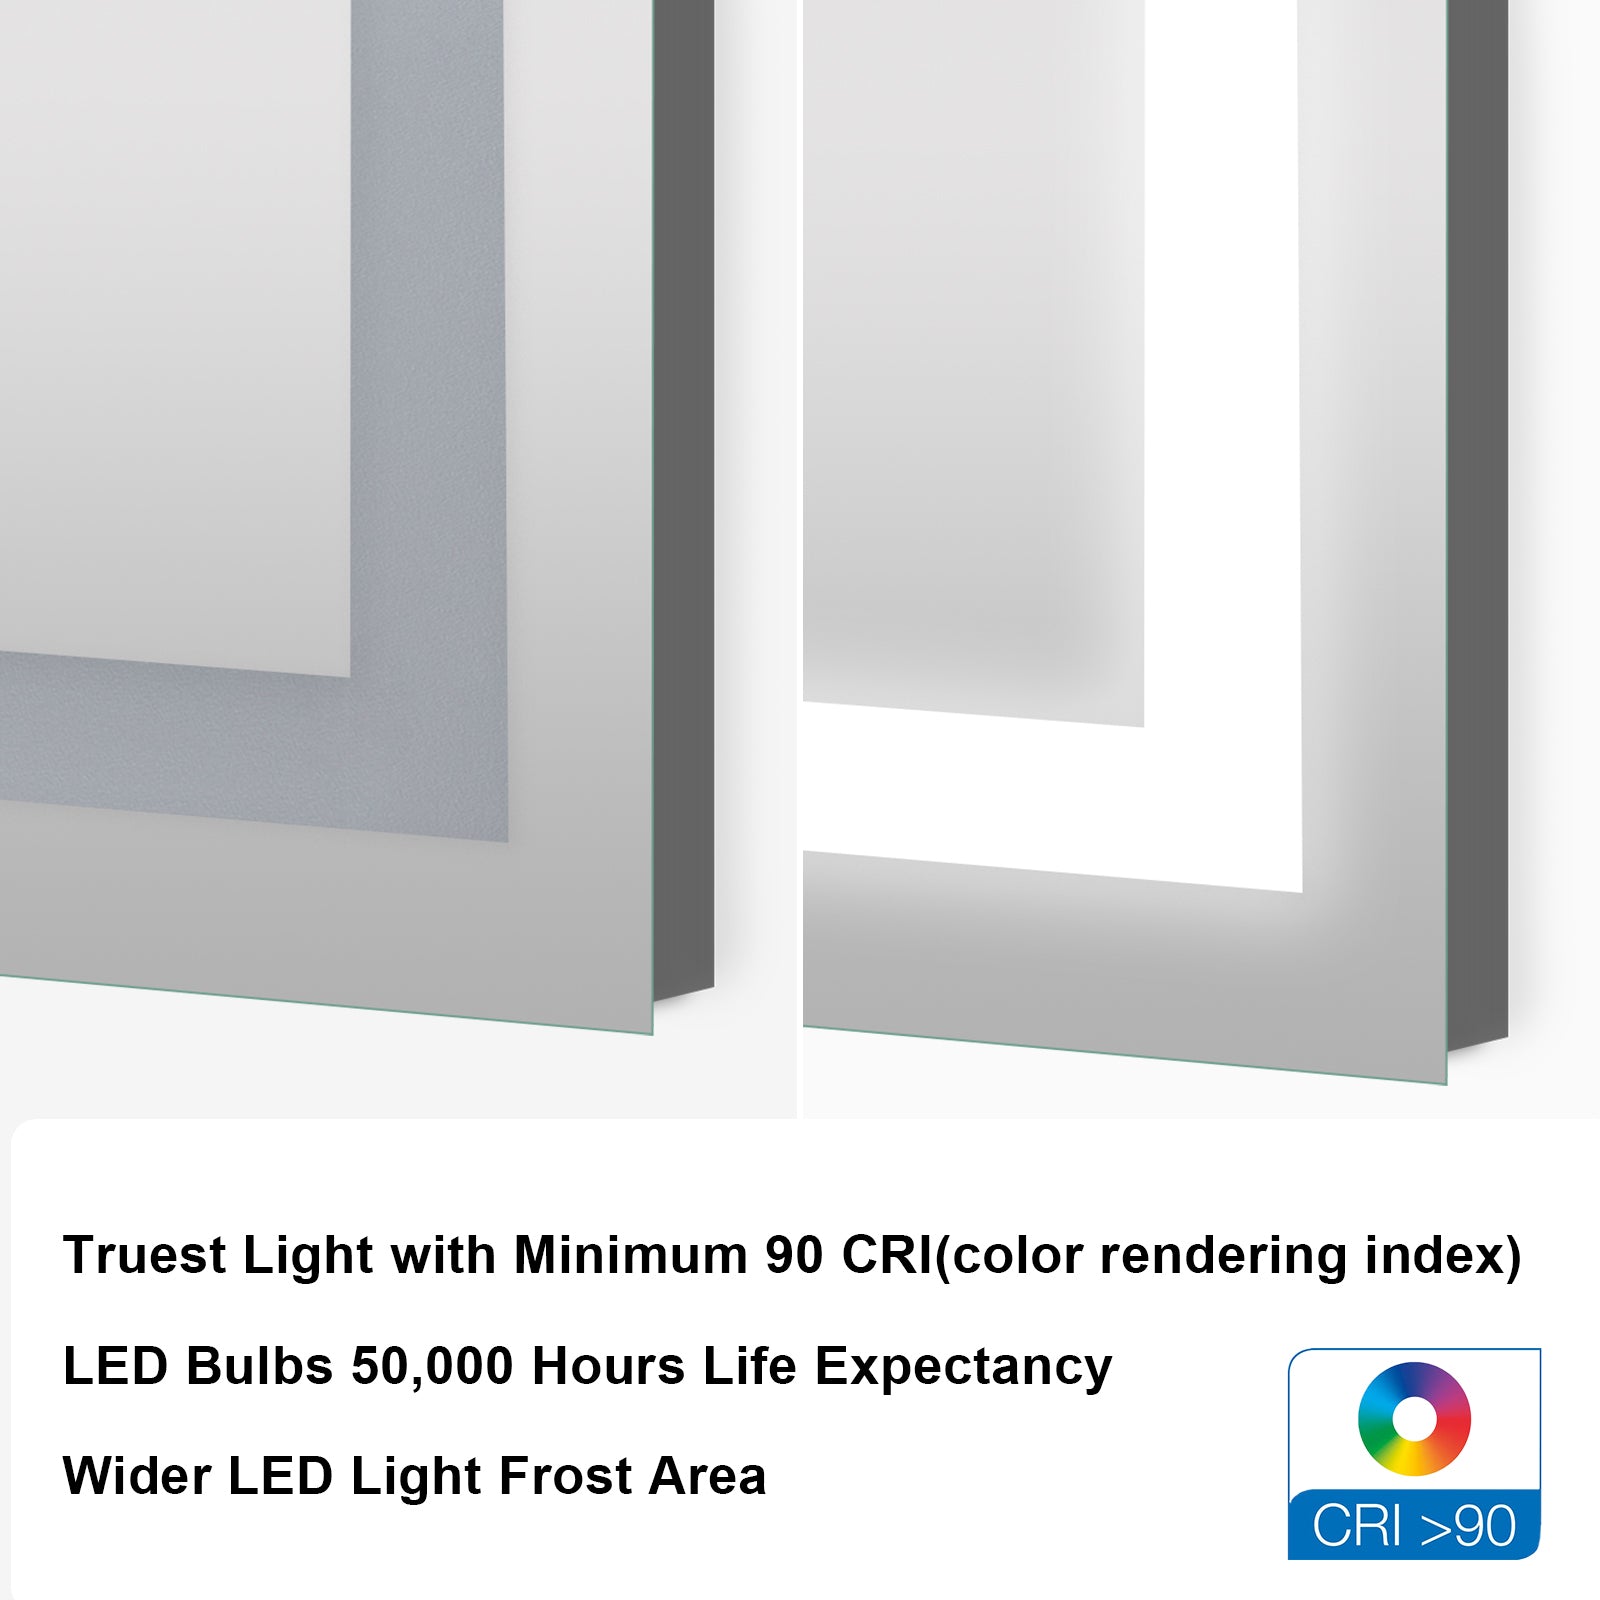 40x24 Inch LED Lighted Bathroom Mirror with 3 Colors silver-aluminium